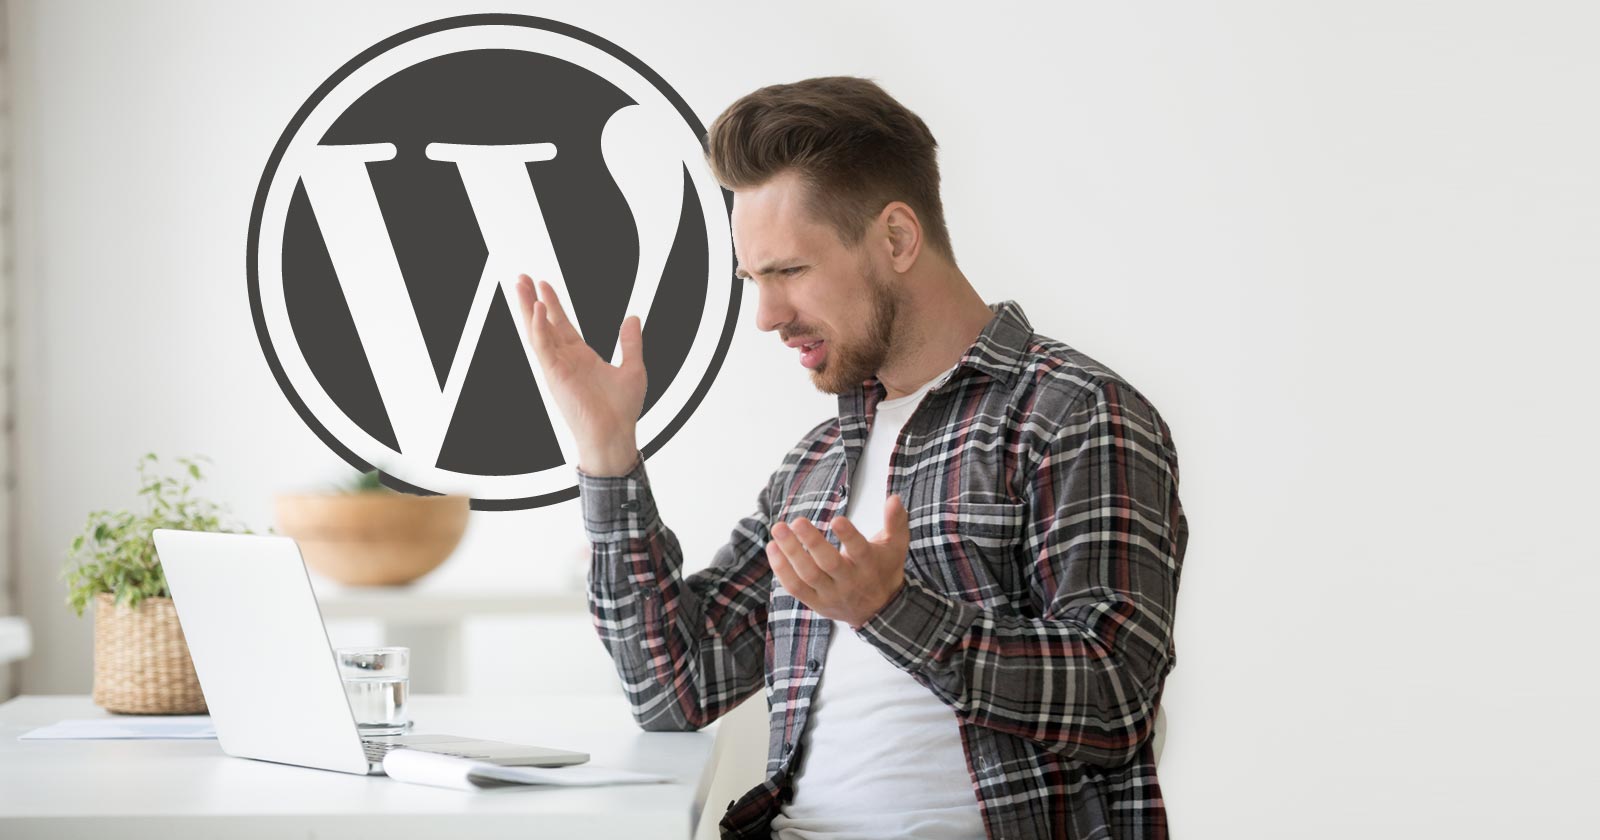 ACF WordPress Plugin Vulnerability Affects Up To +2 Million Sites